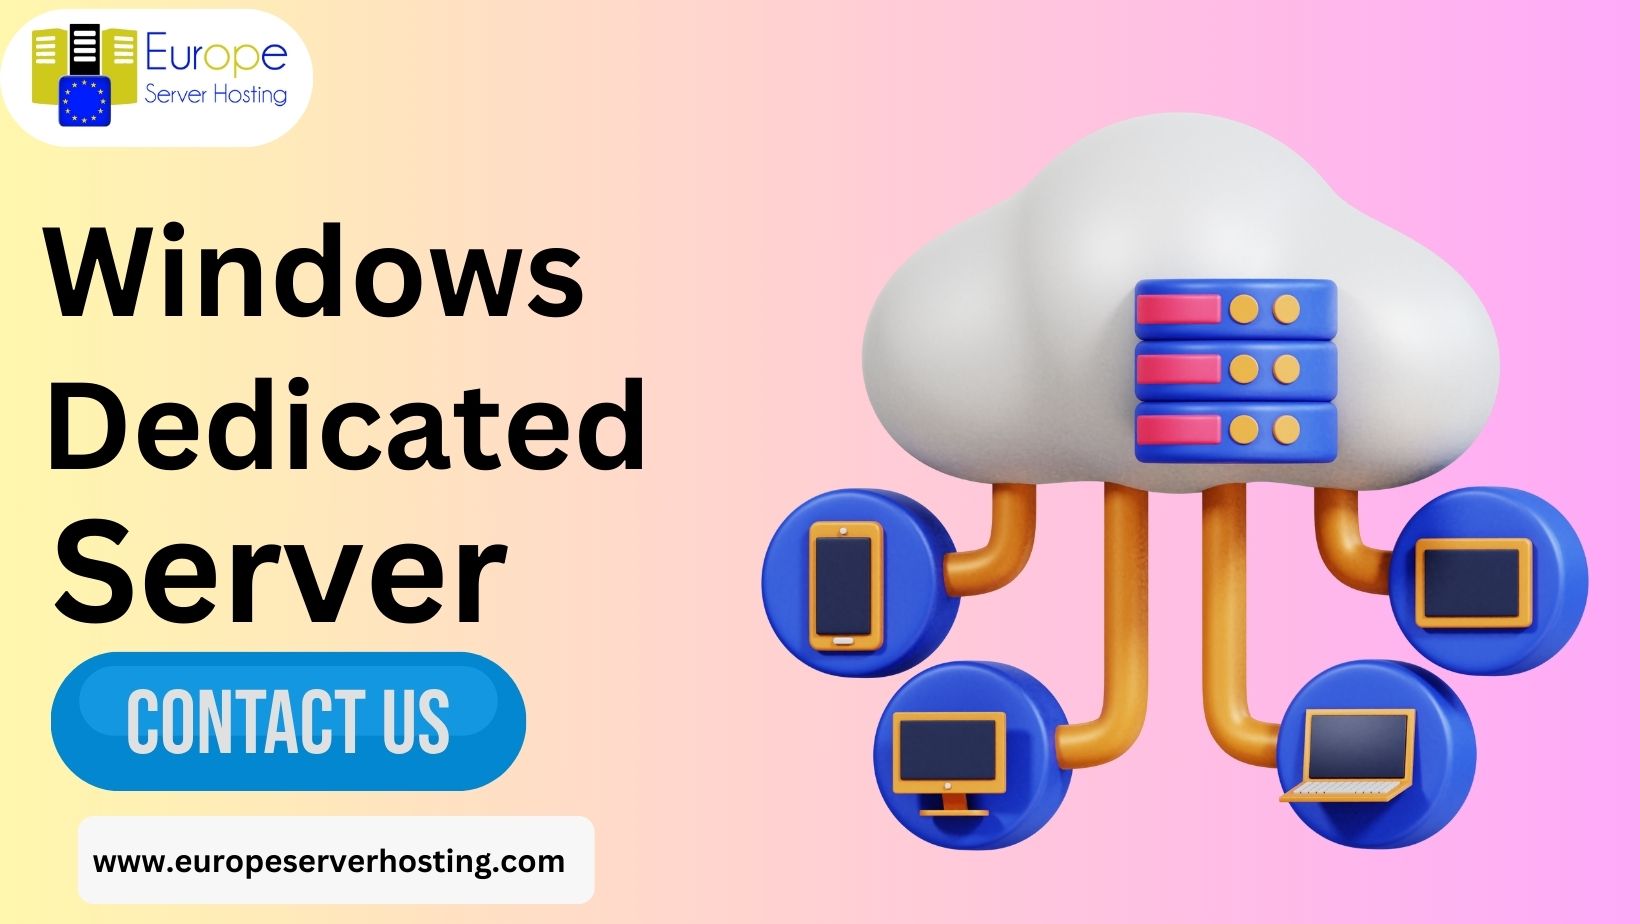 A Windows Dedicated Server is a type of hosting solution where an entire server is dedicated to a single user or entity. Unlike shared hosting, where multiple users share server resources, a dedicated server provides exclusive access to all the server's resources, including CPU, RAM, storage, and bandwidth.